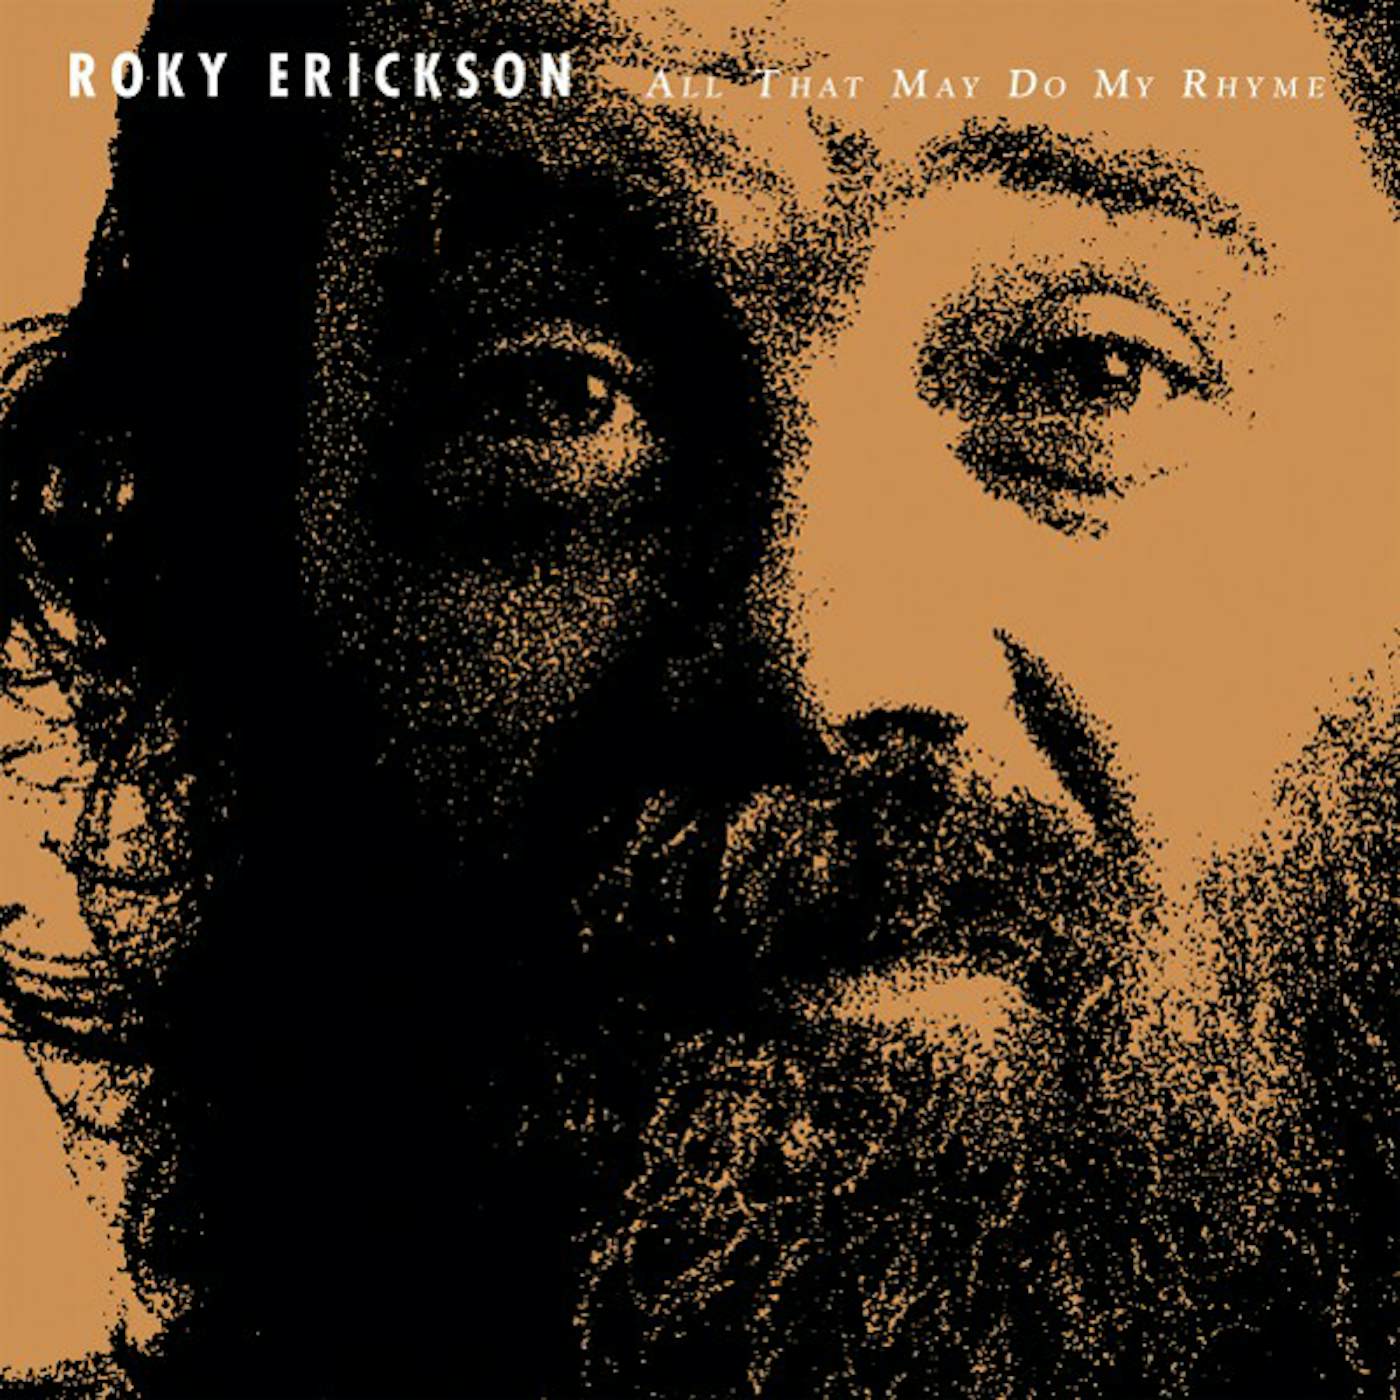 Roky Erickson ALL THAT MAY DO MY RHYME CD